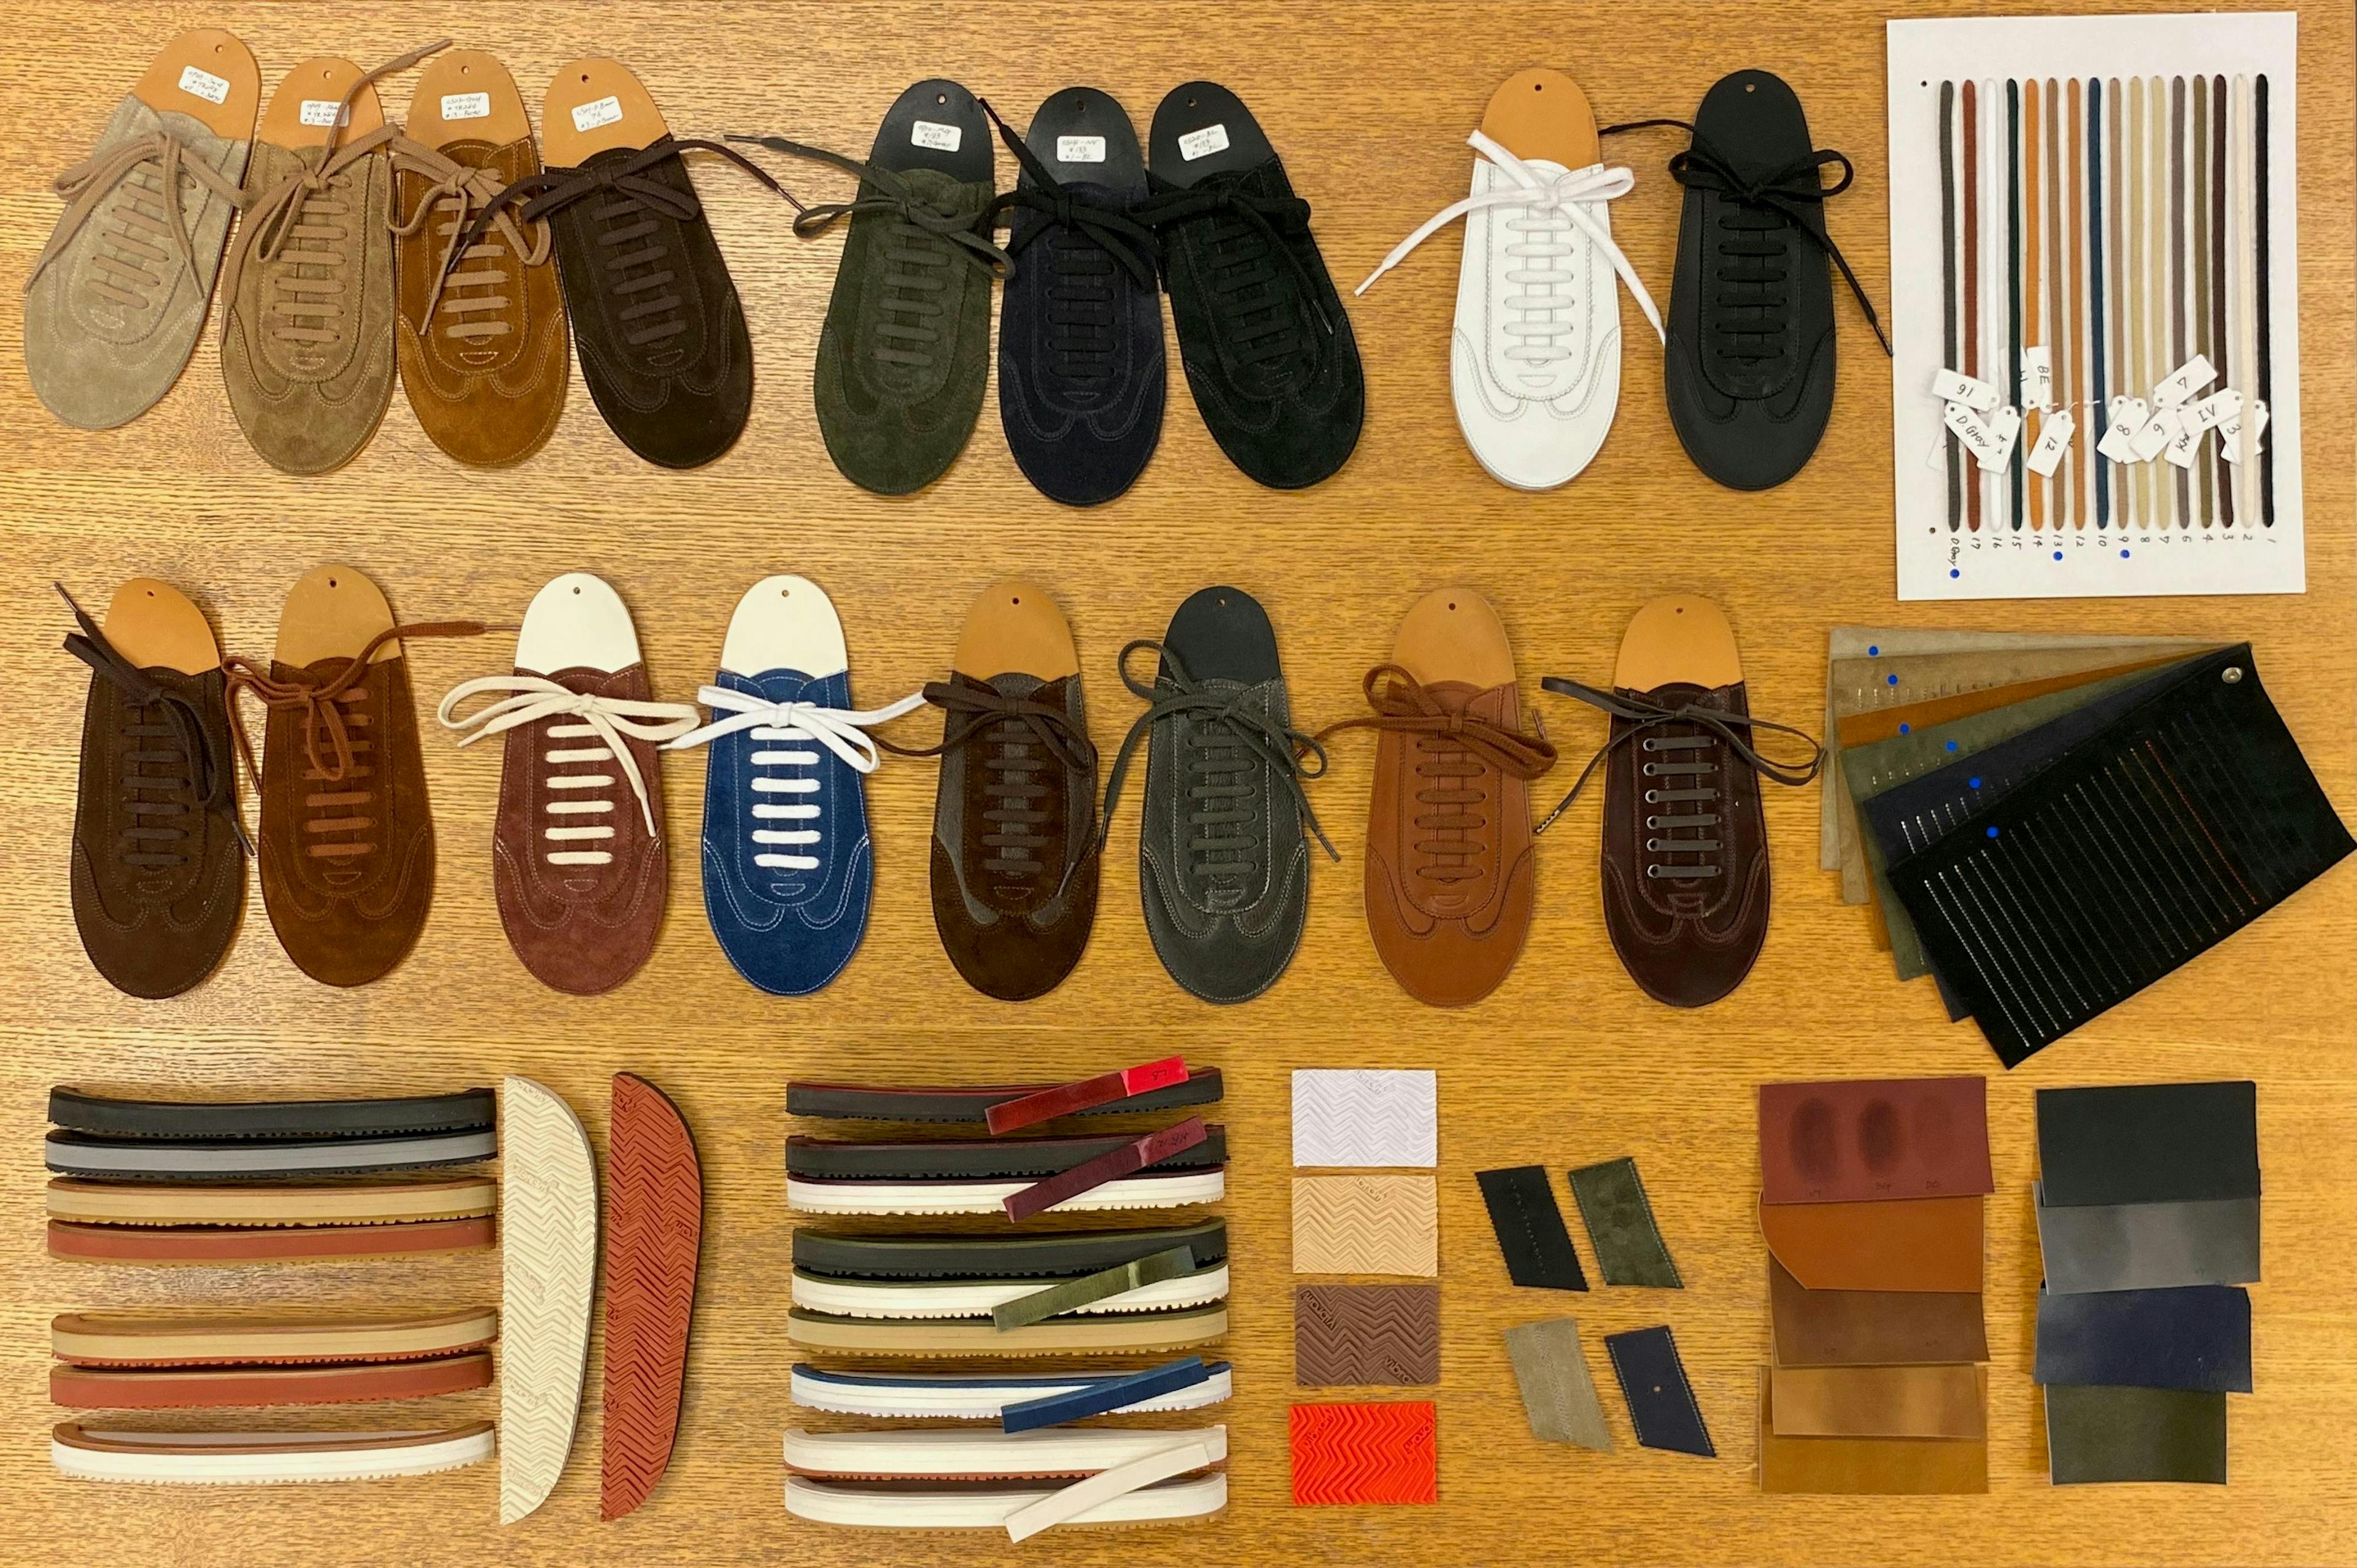 Overview of all Hiro Yanagimachi LS1 leather and sole samples.